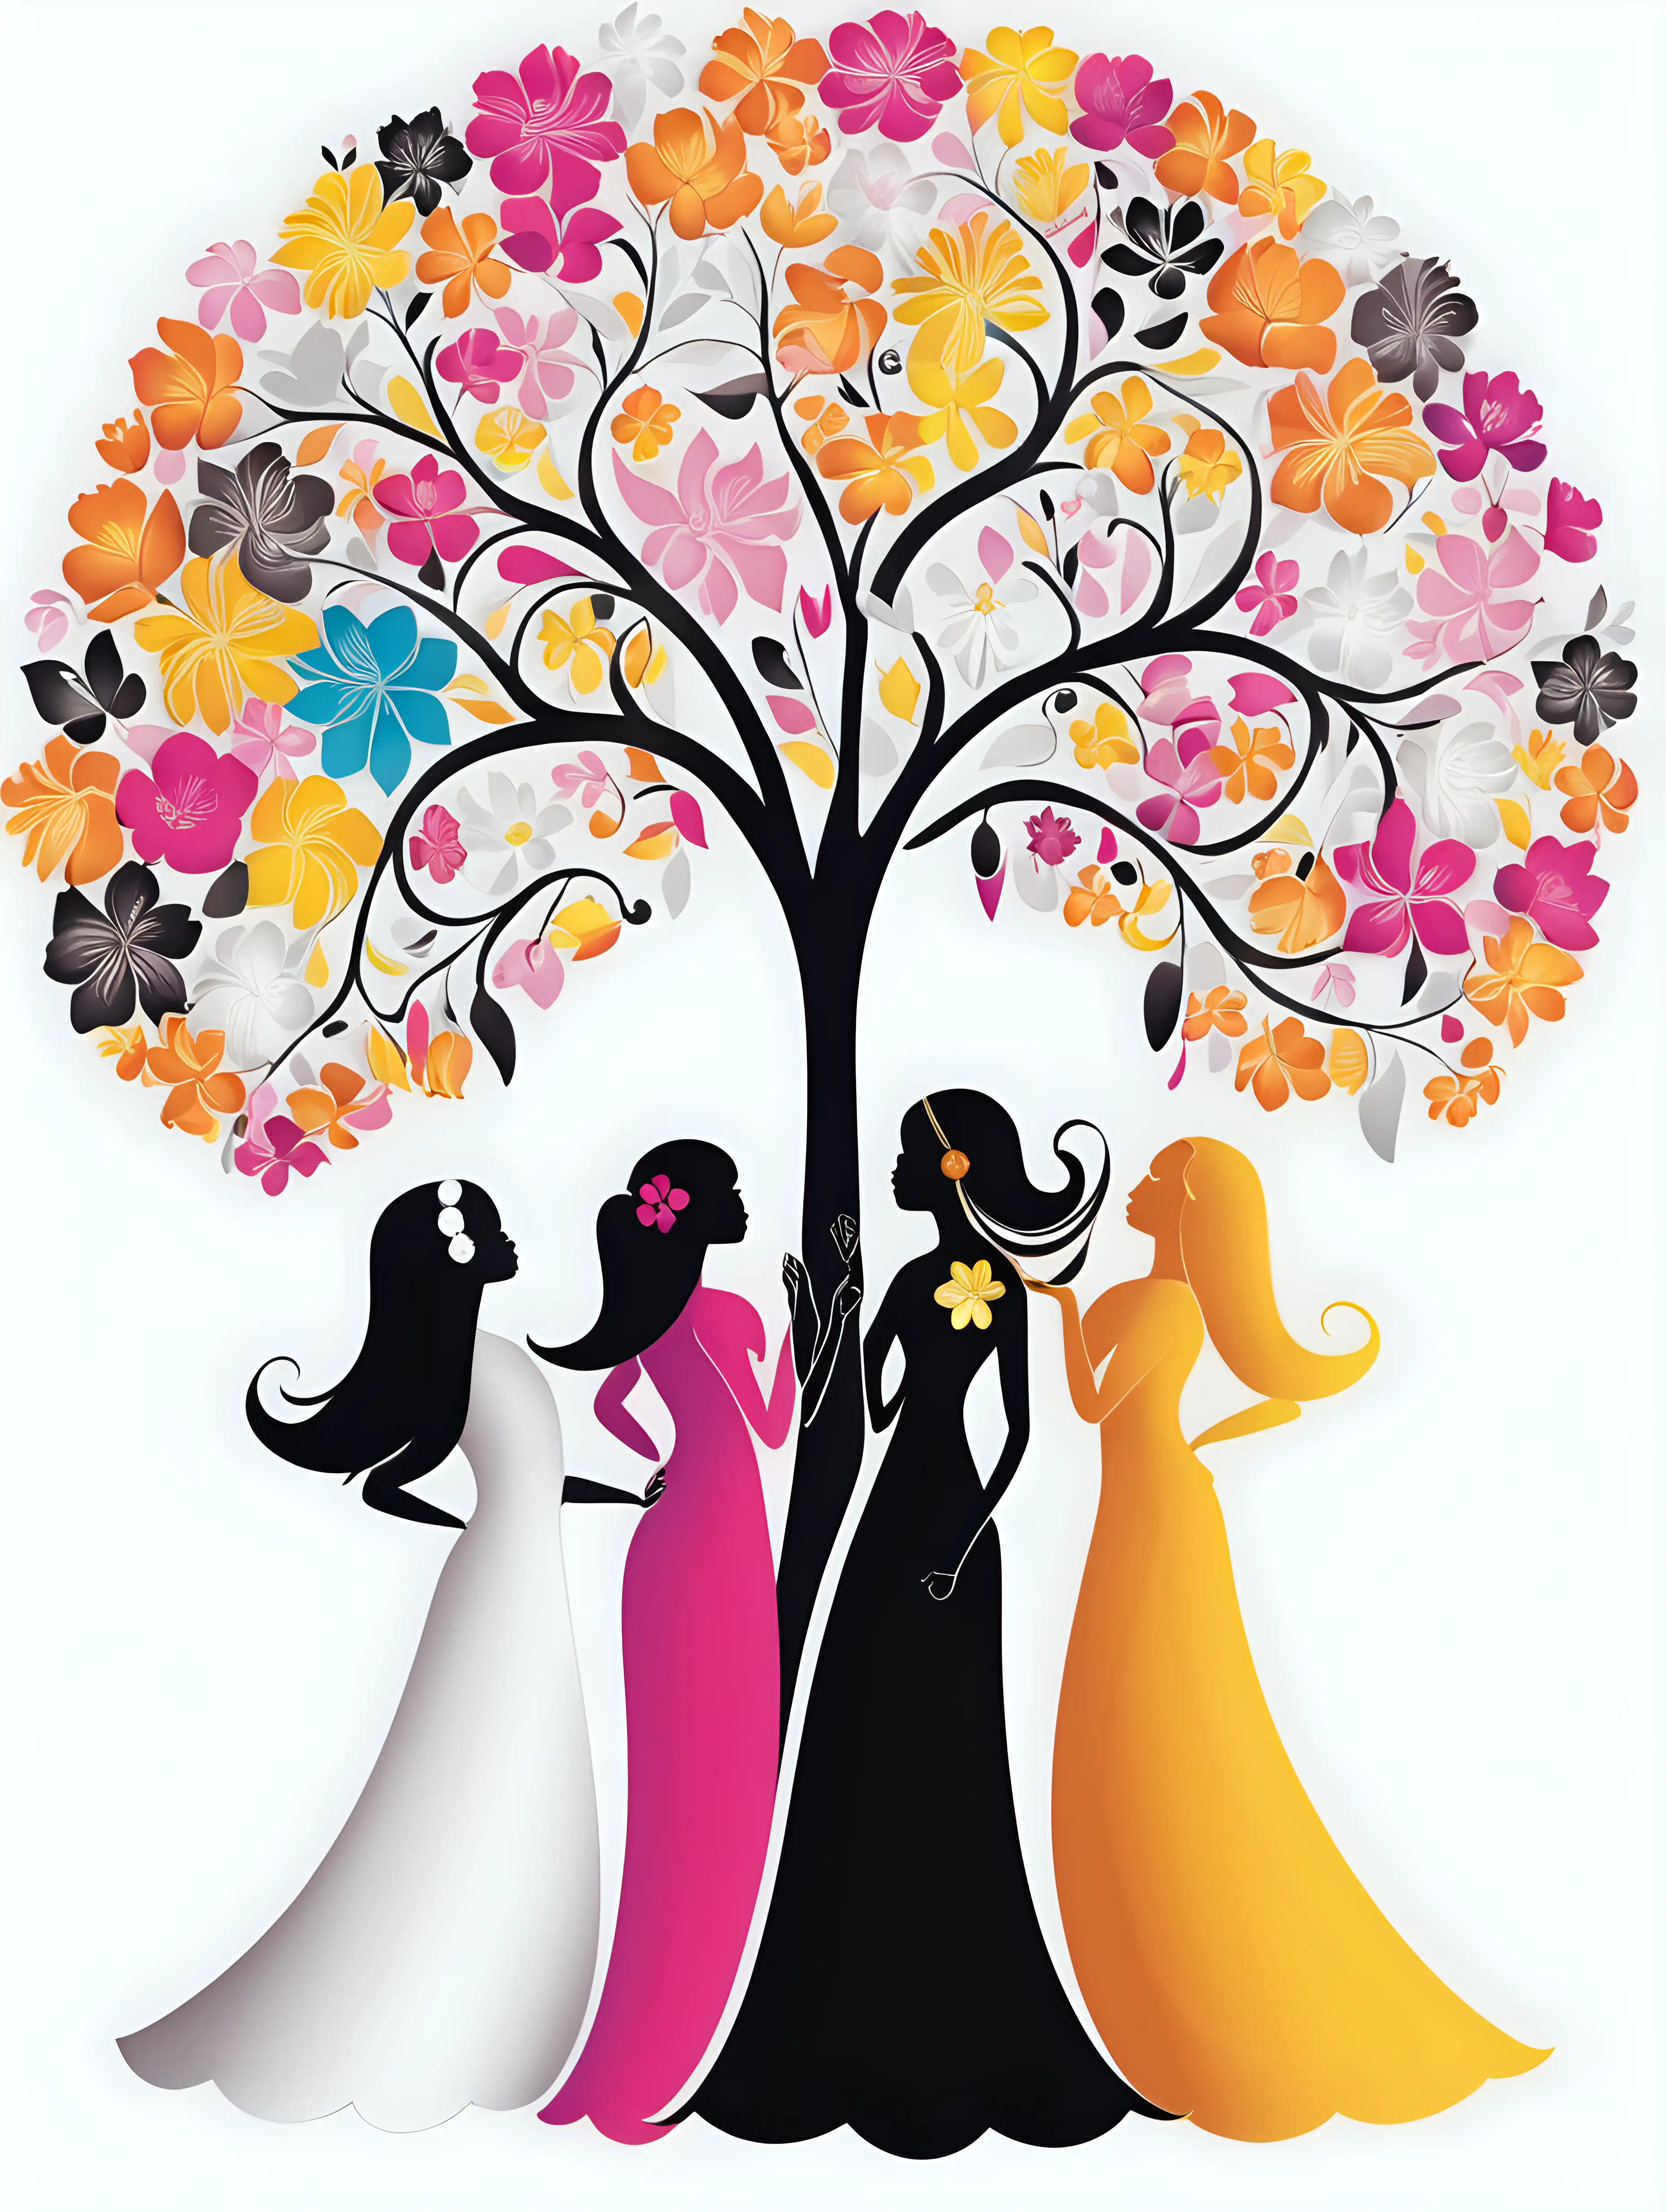 Diverse Women Celebrate Womens Day in Vibrant Greeting Card